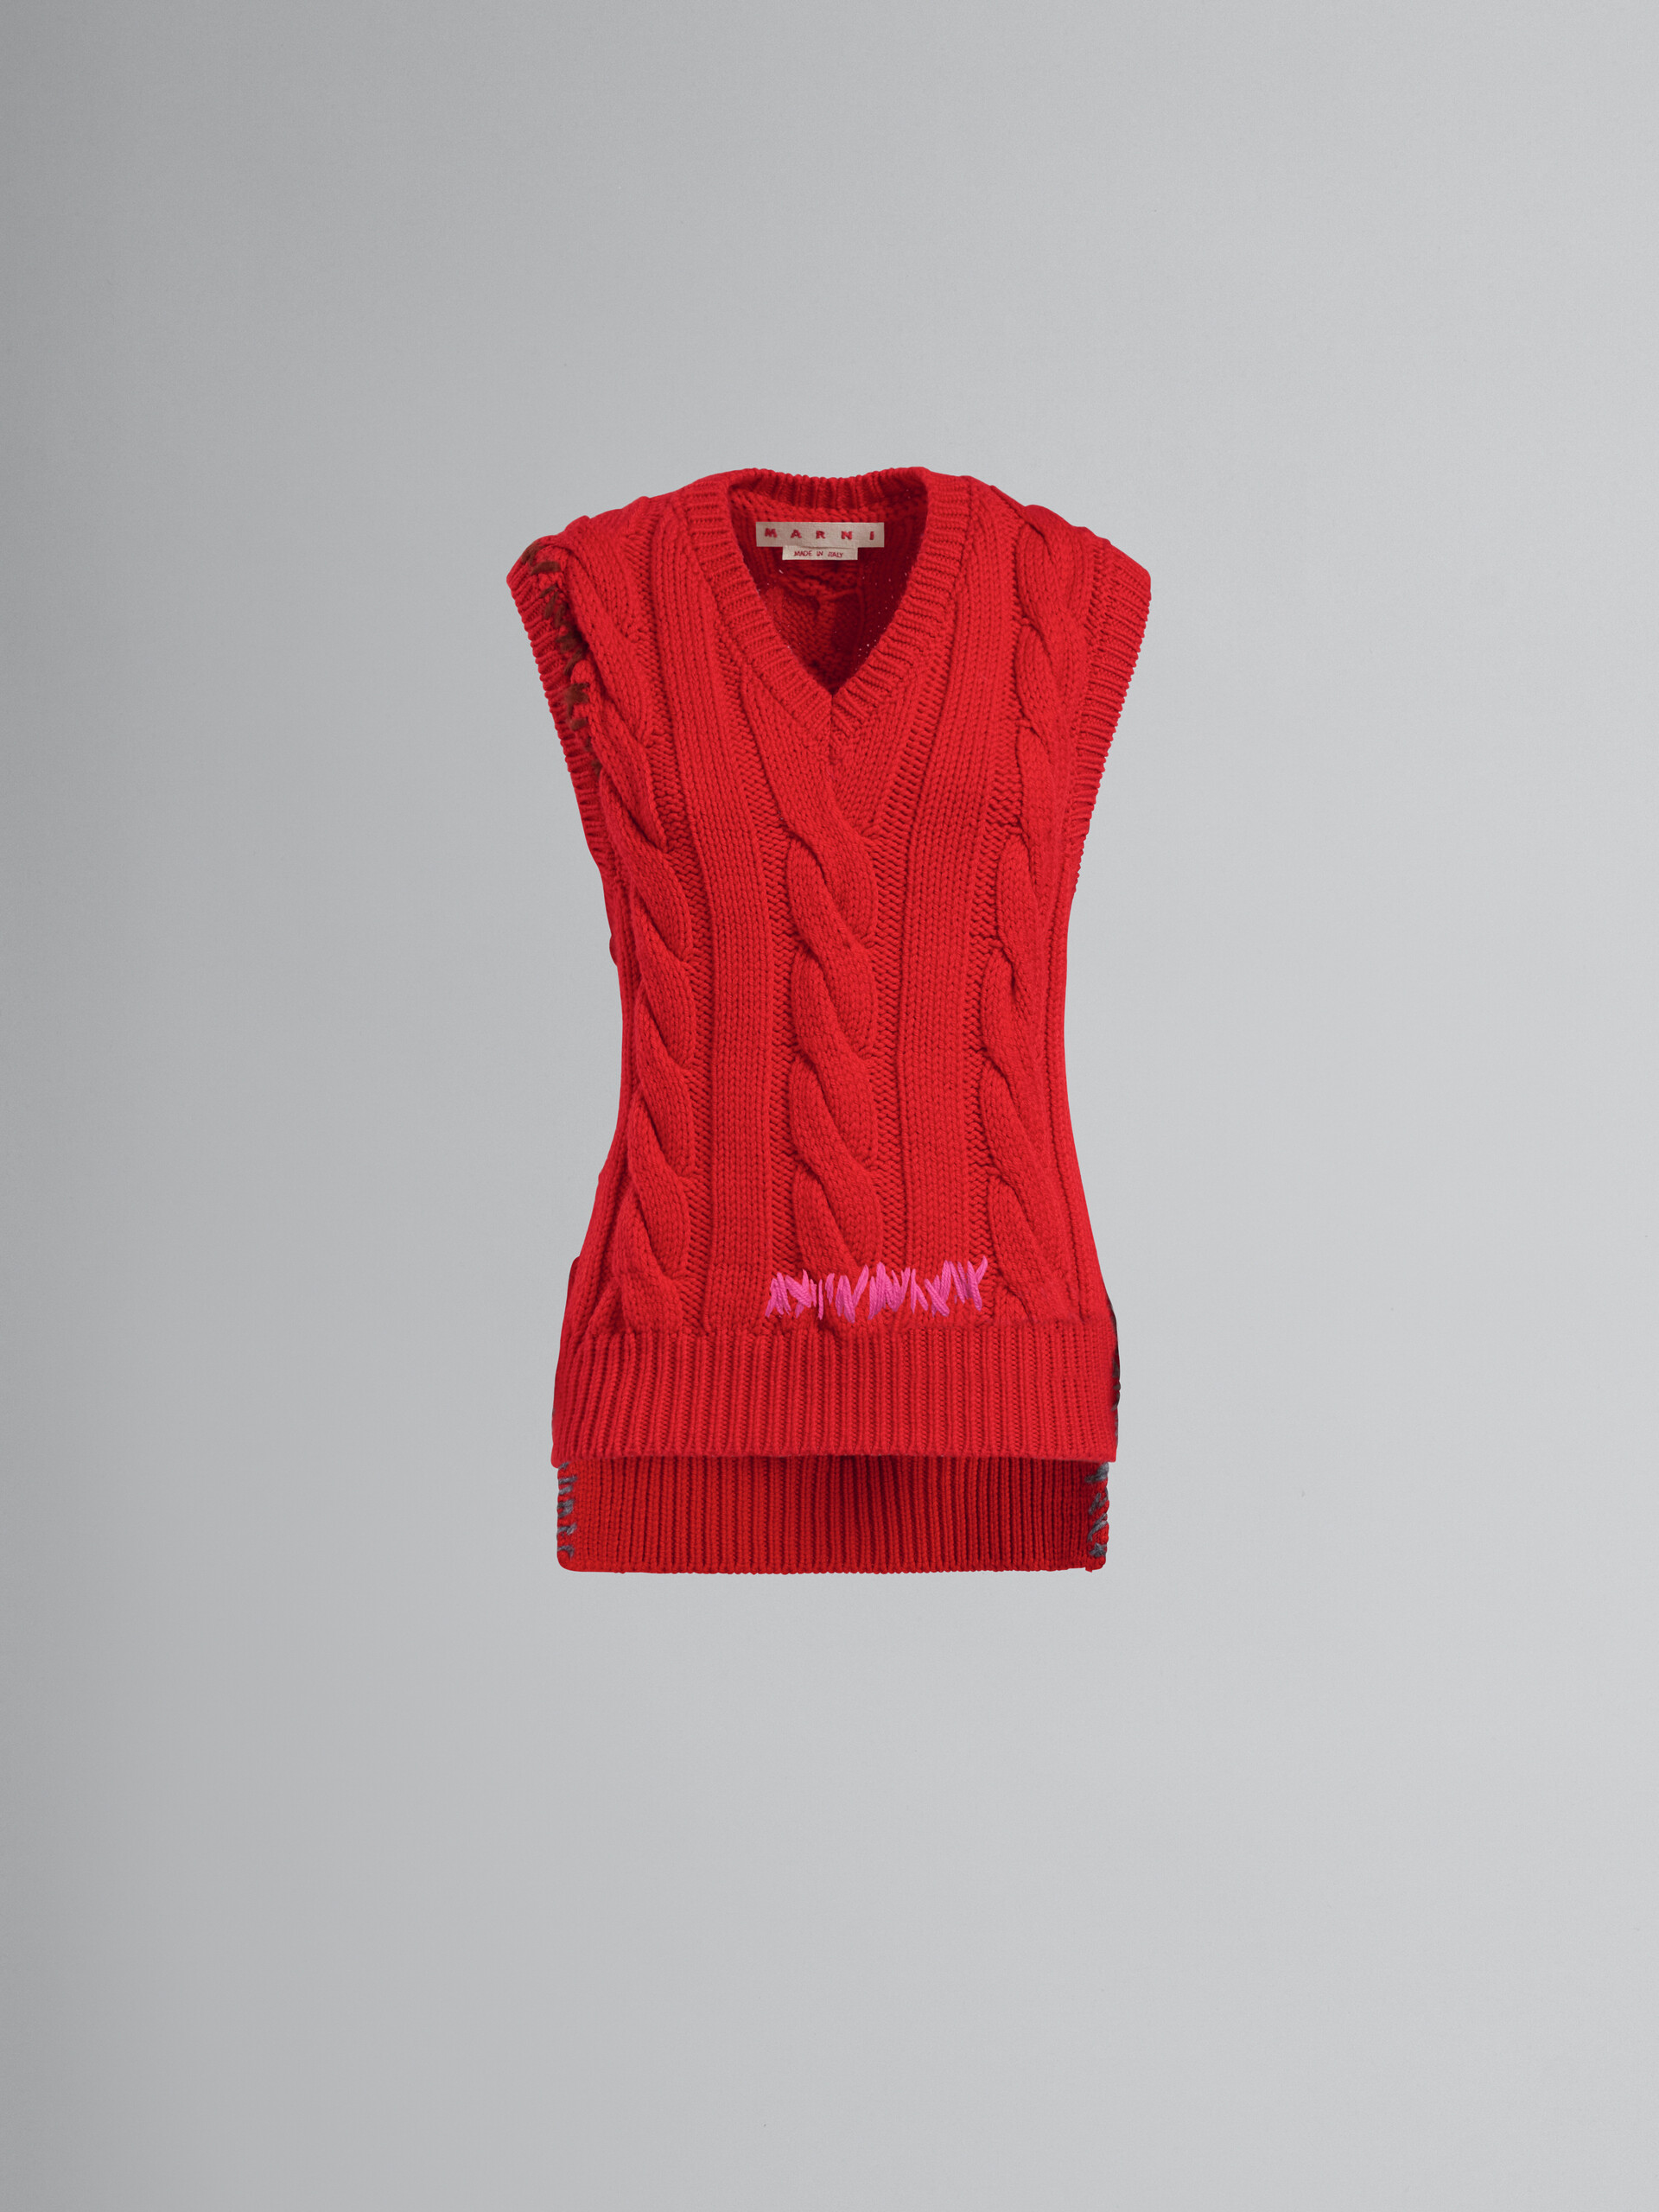 Red cable-knit vest - Pullovers - Image 1